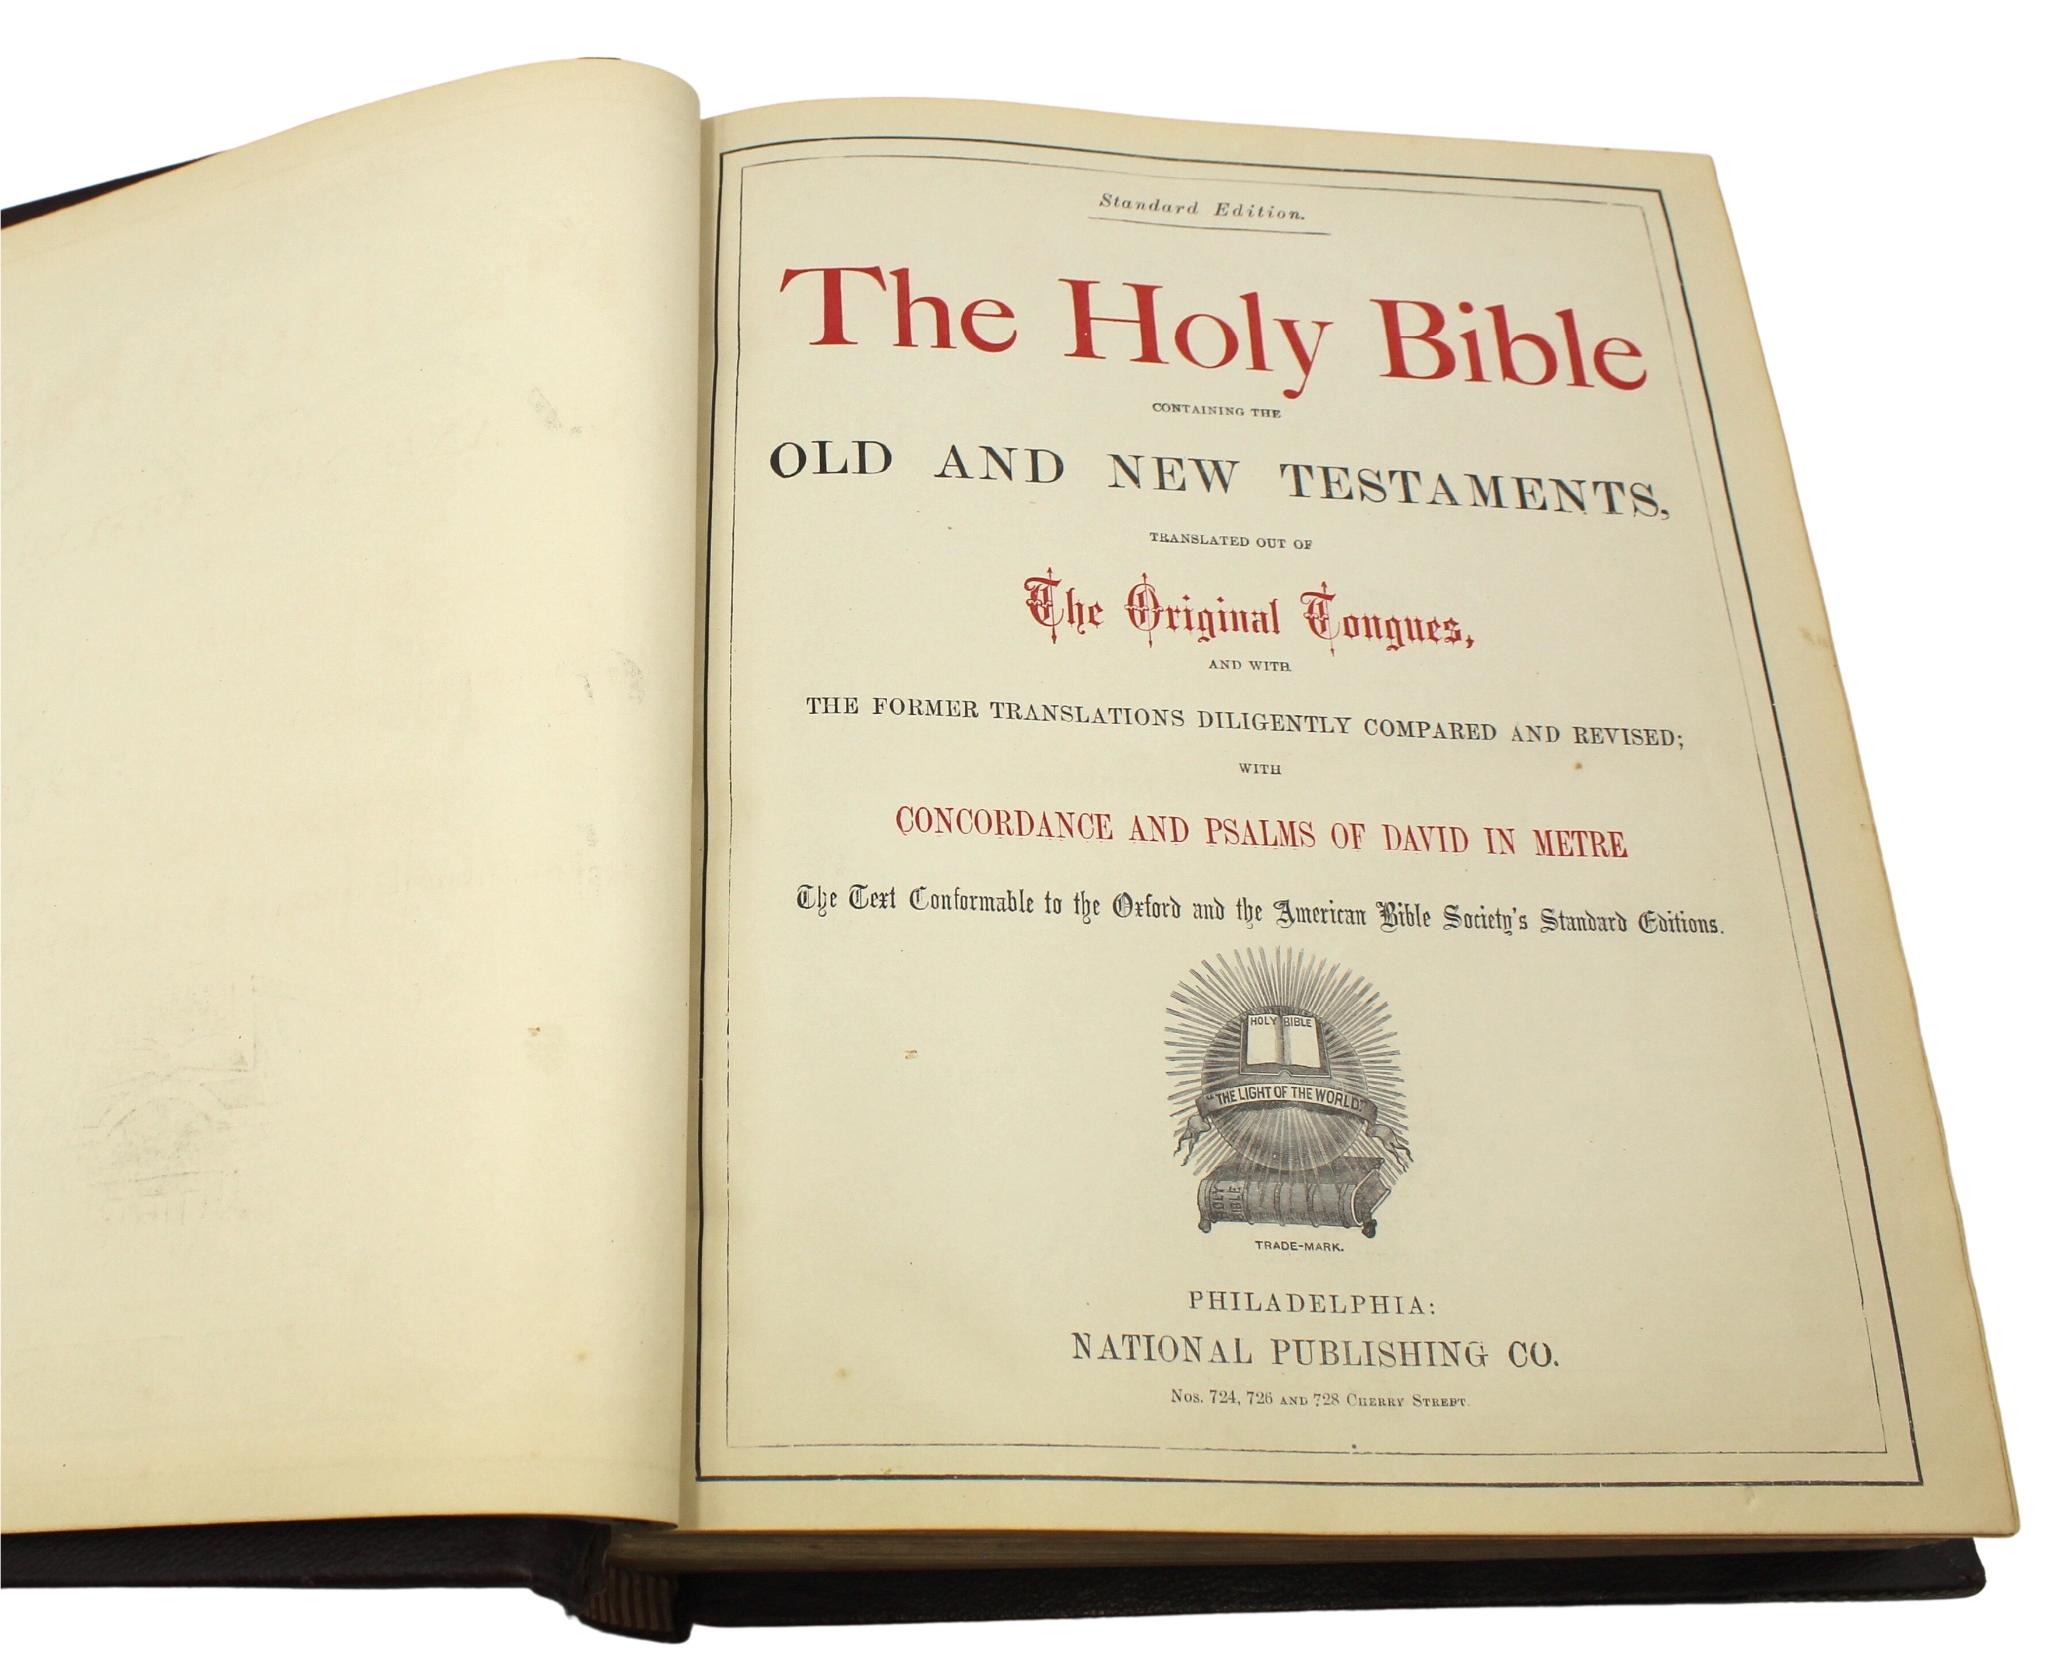 Gothic Revival The Holy Bible, Containing the Old and New Testaments, Illustrated, 1885